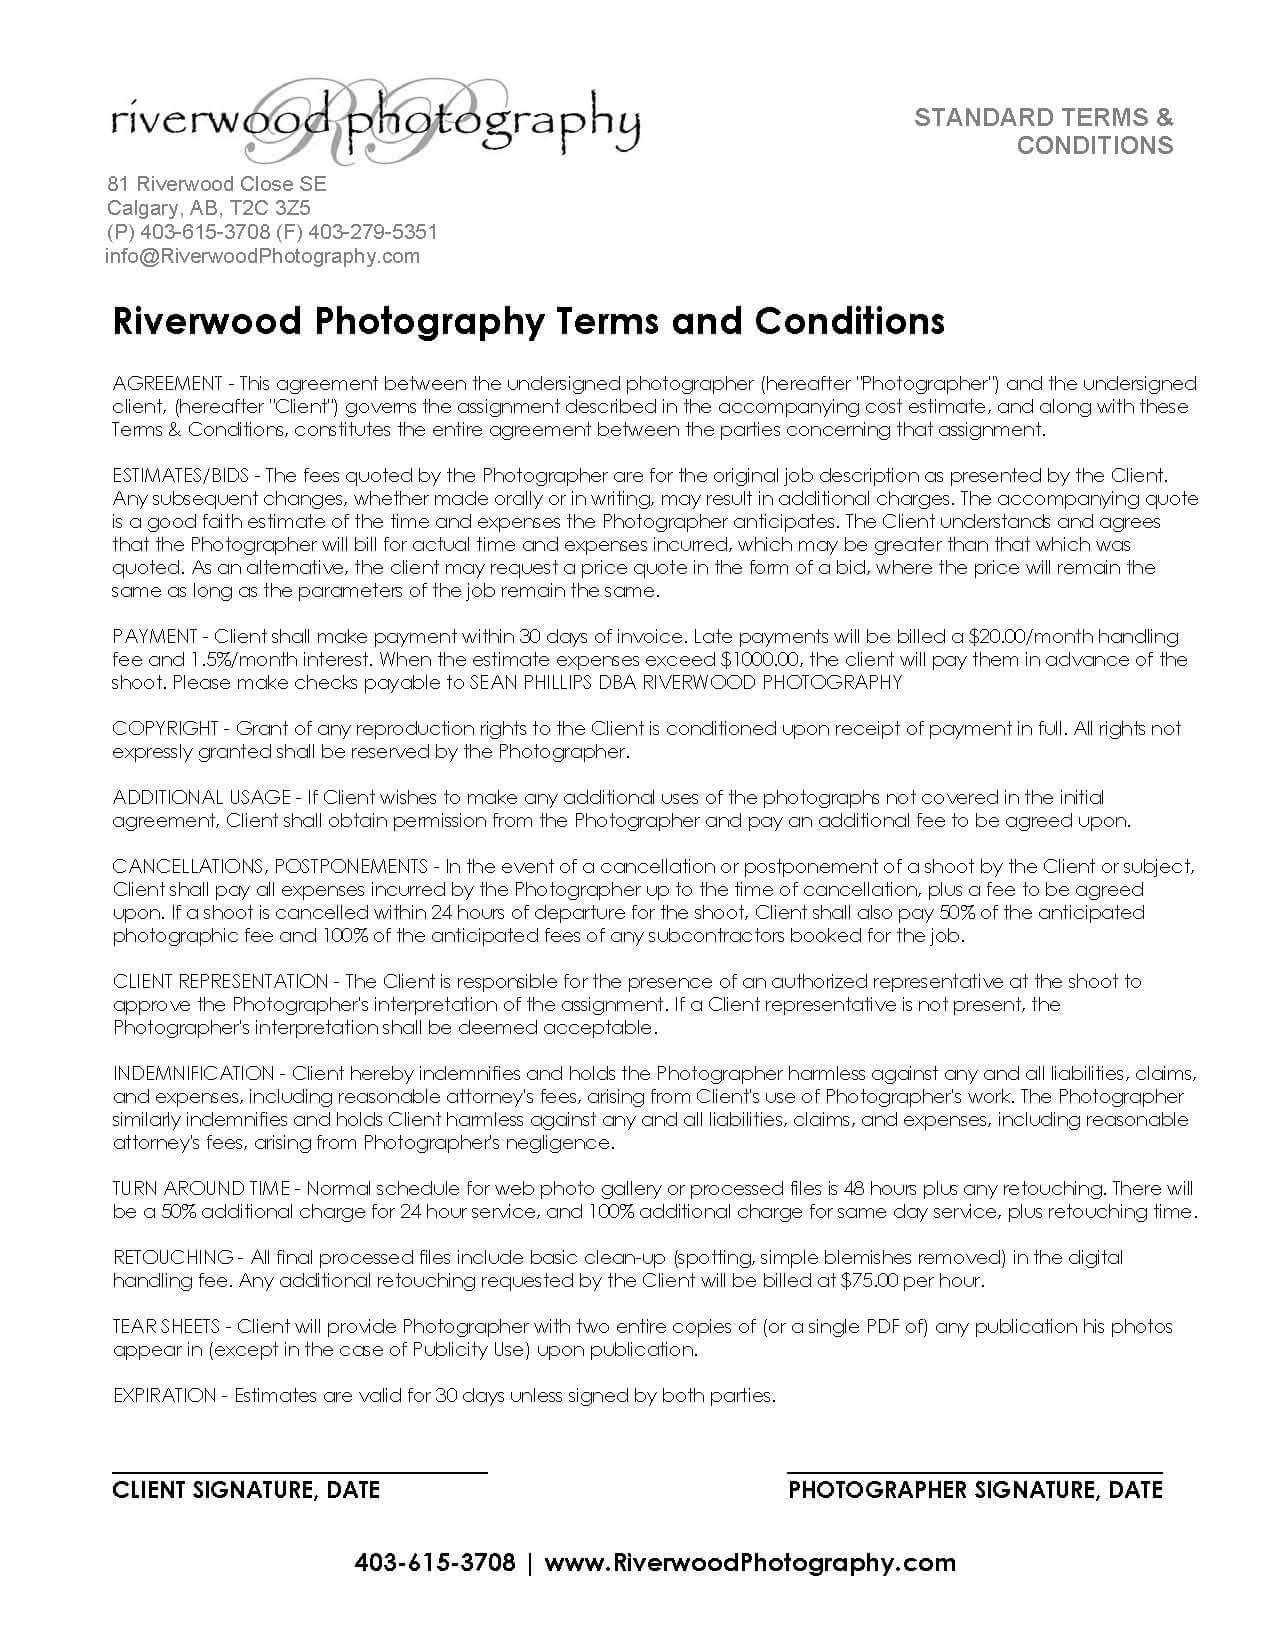 Riverwood Photography Terms and Conditions